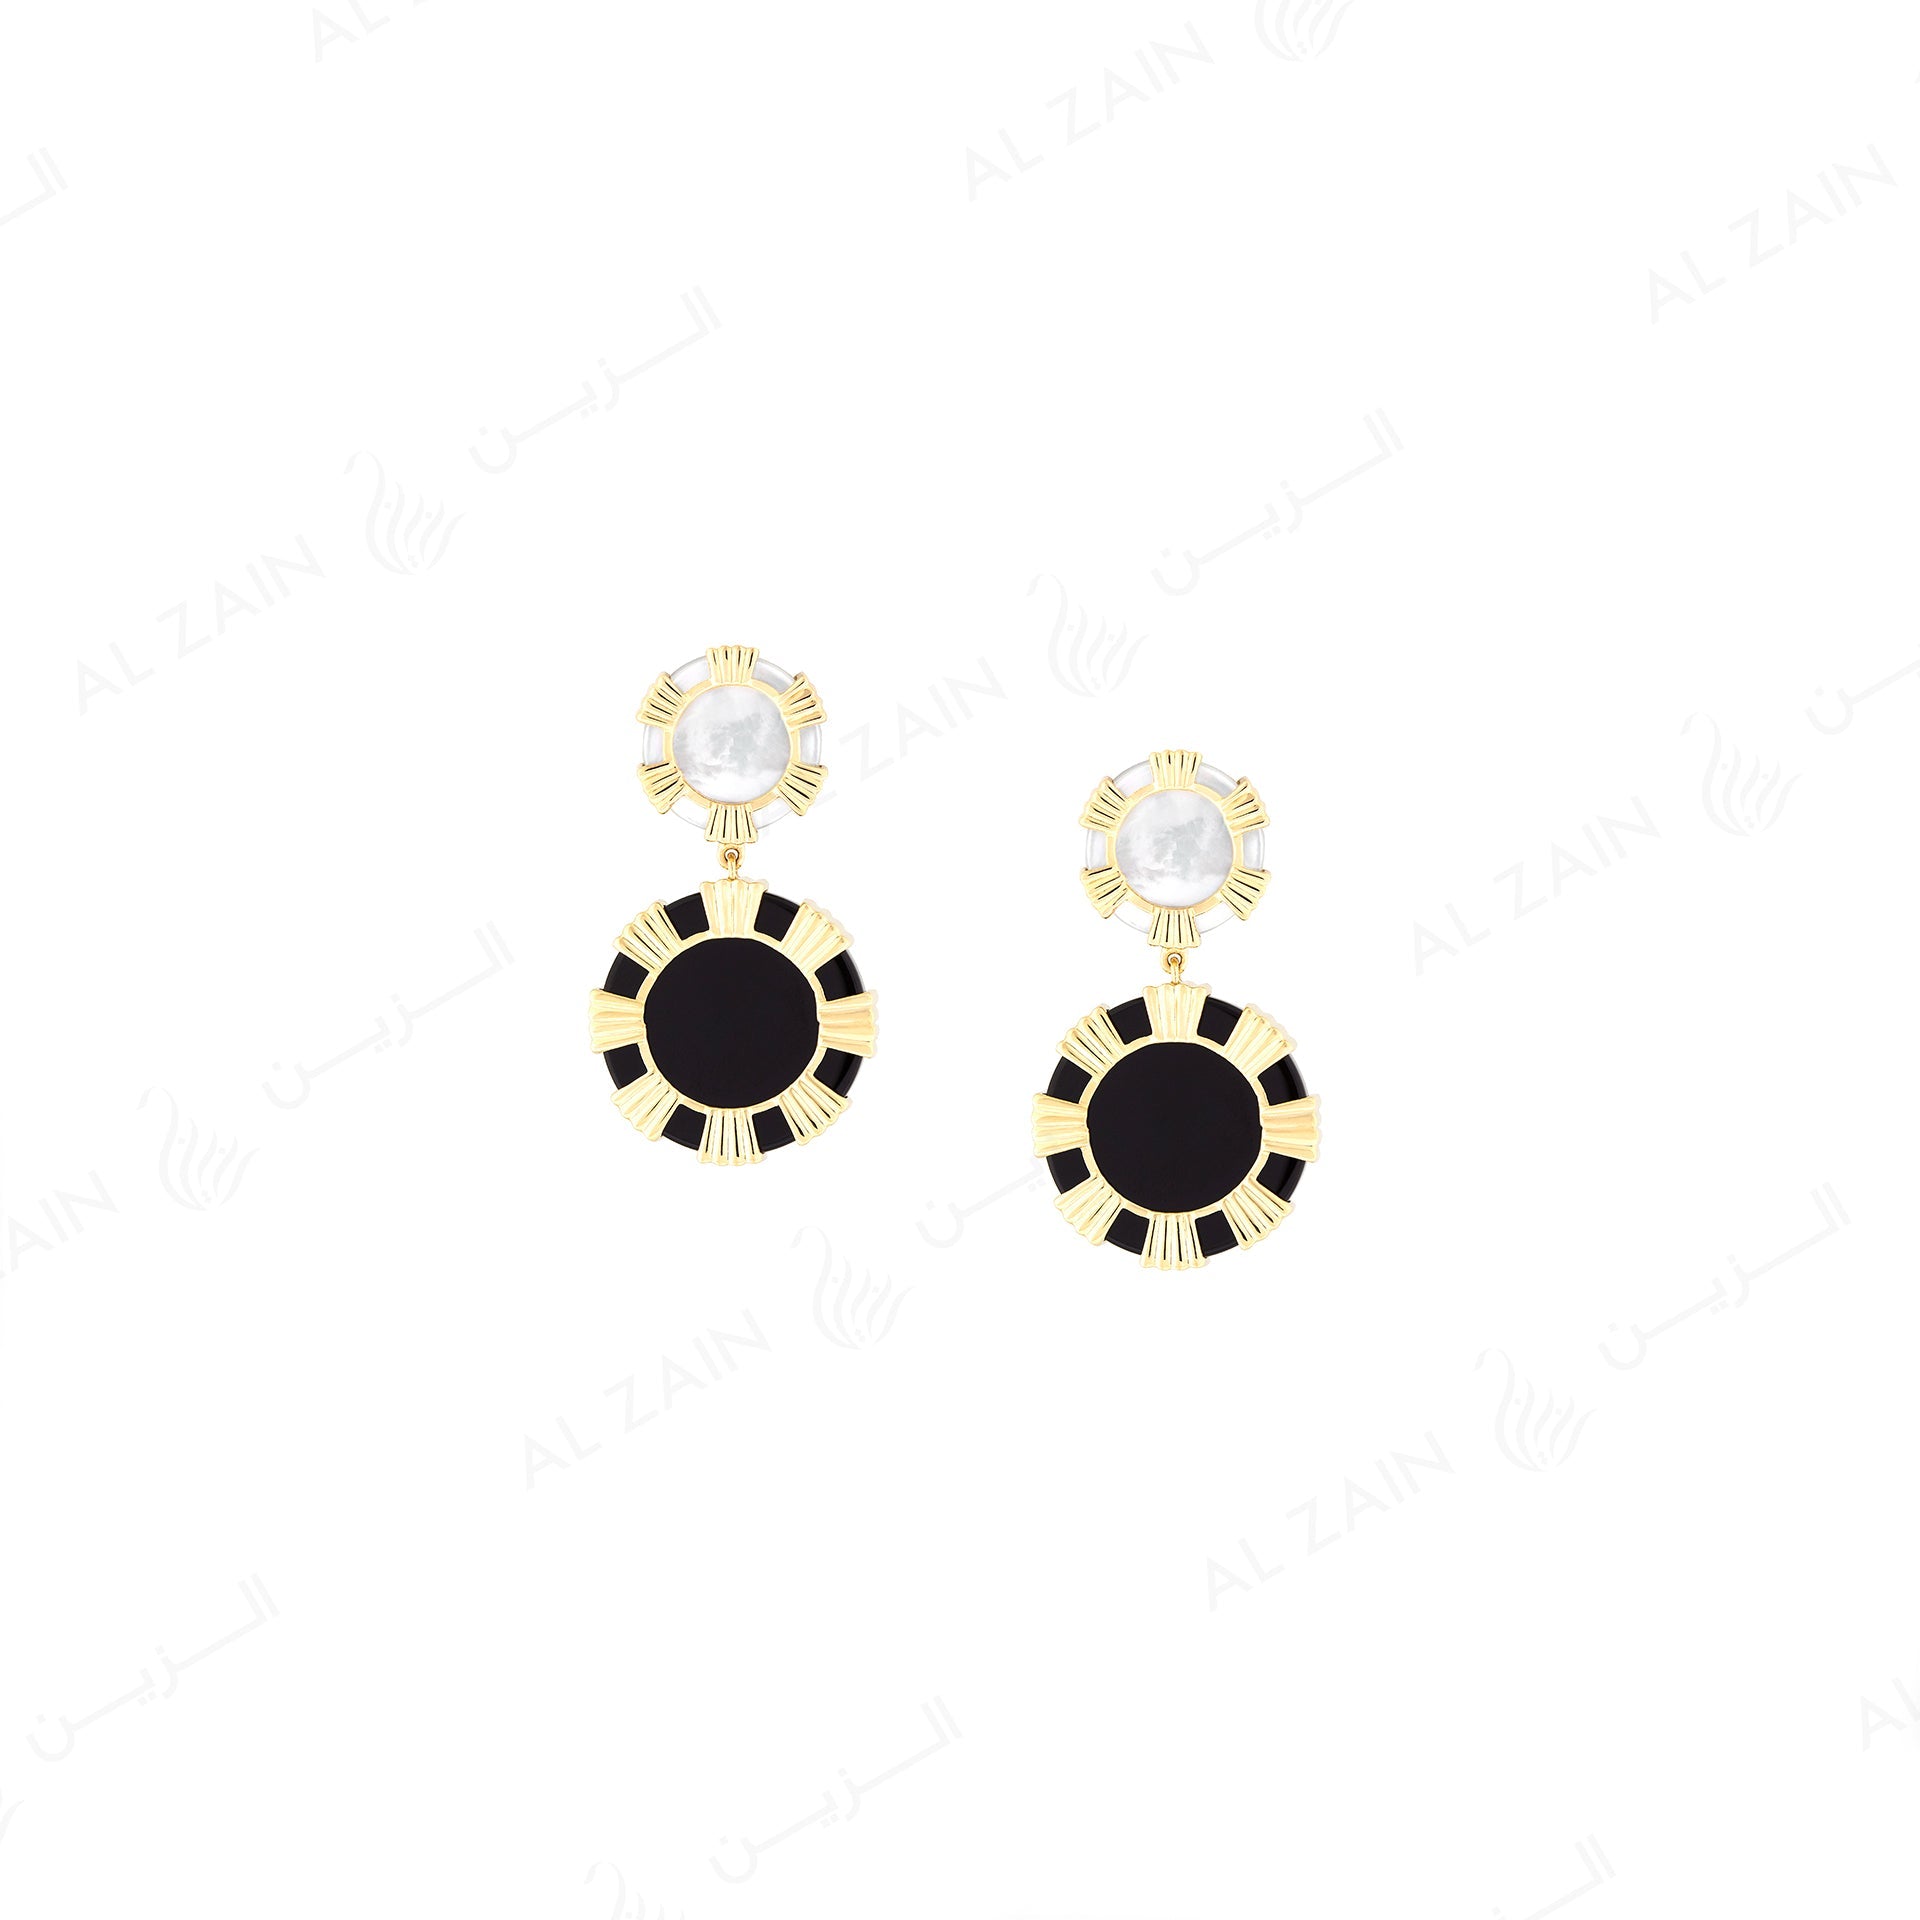 Cordoba earrings in yellow gold with mother of pearl and onyx stones